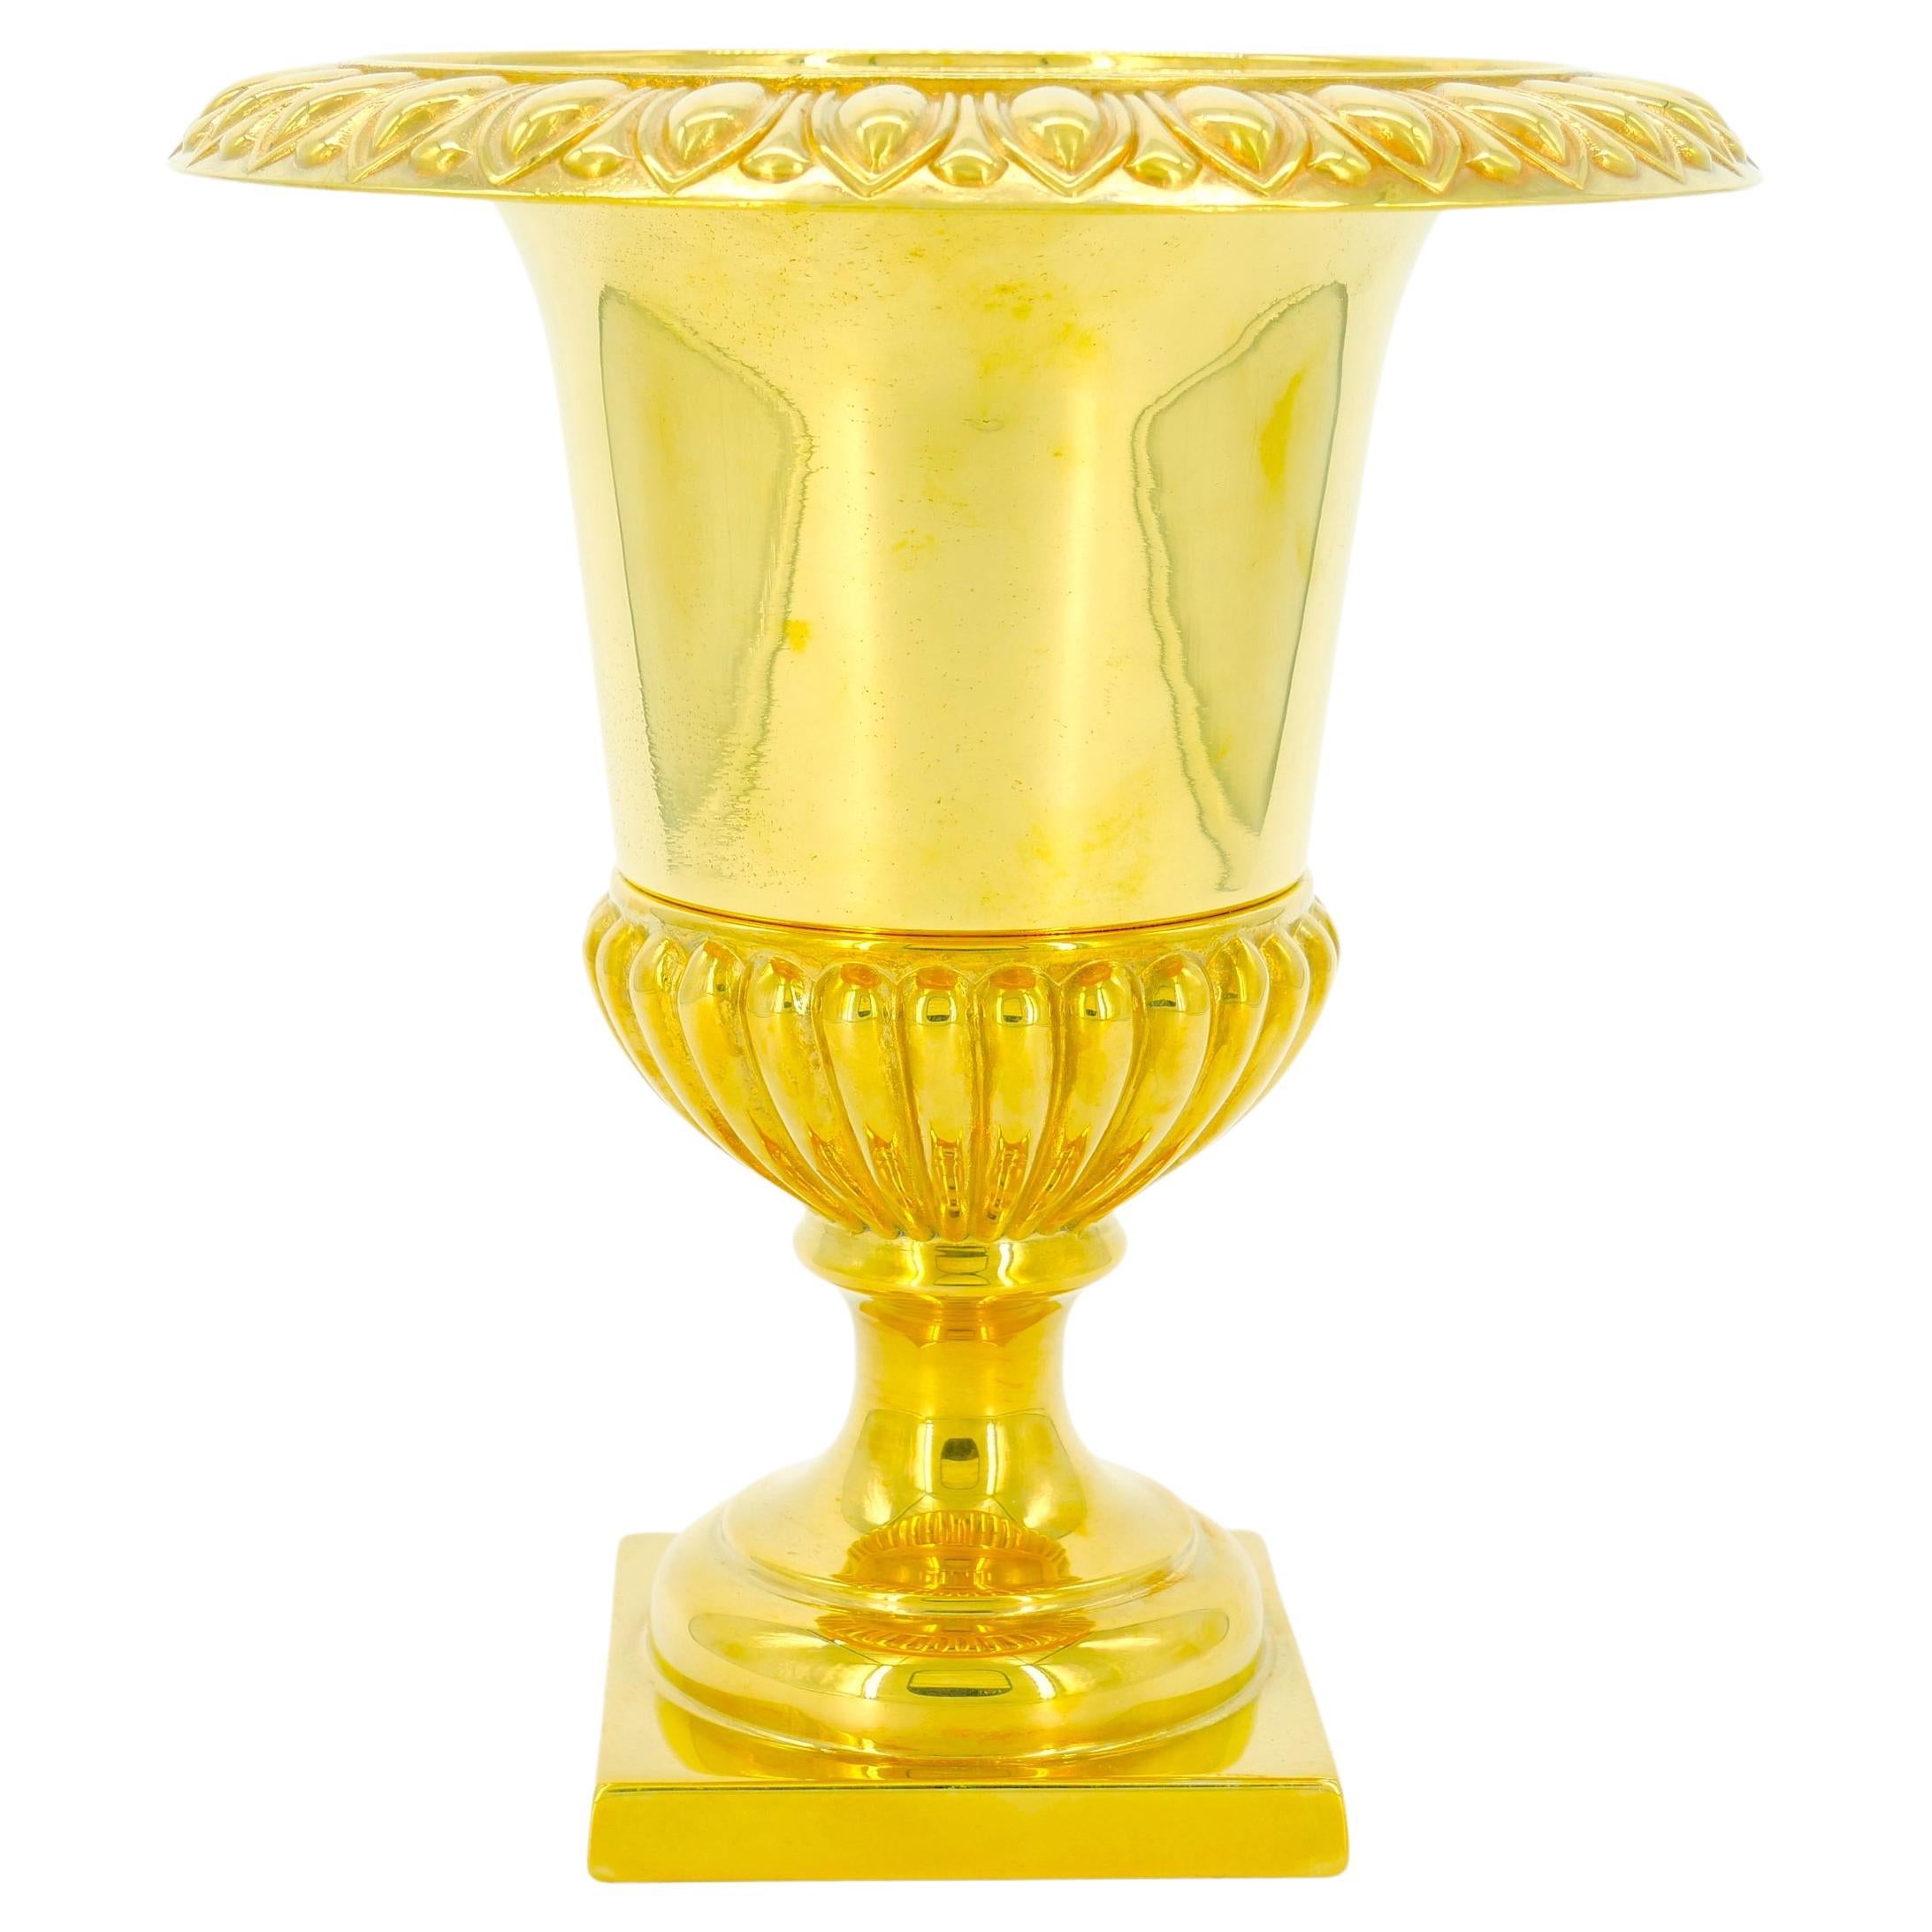 Neoclassical Gilt Campana Form Wine Cooler / Ice Bucket For Sale